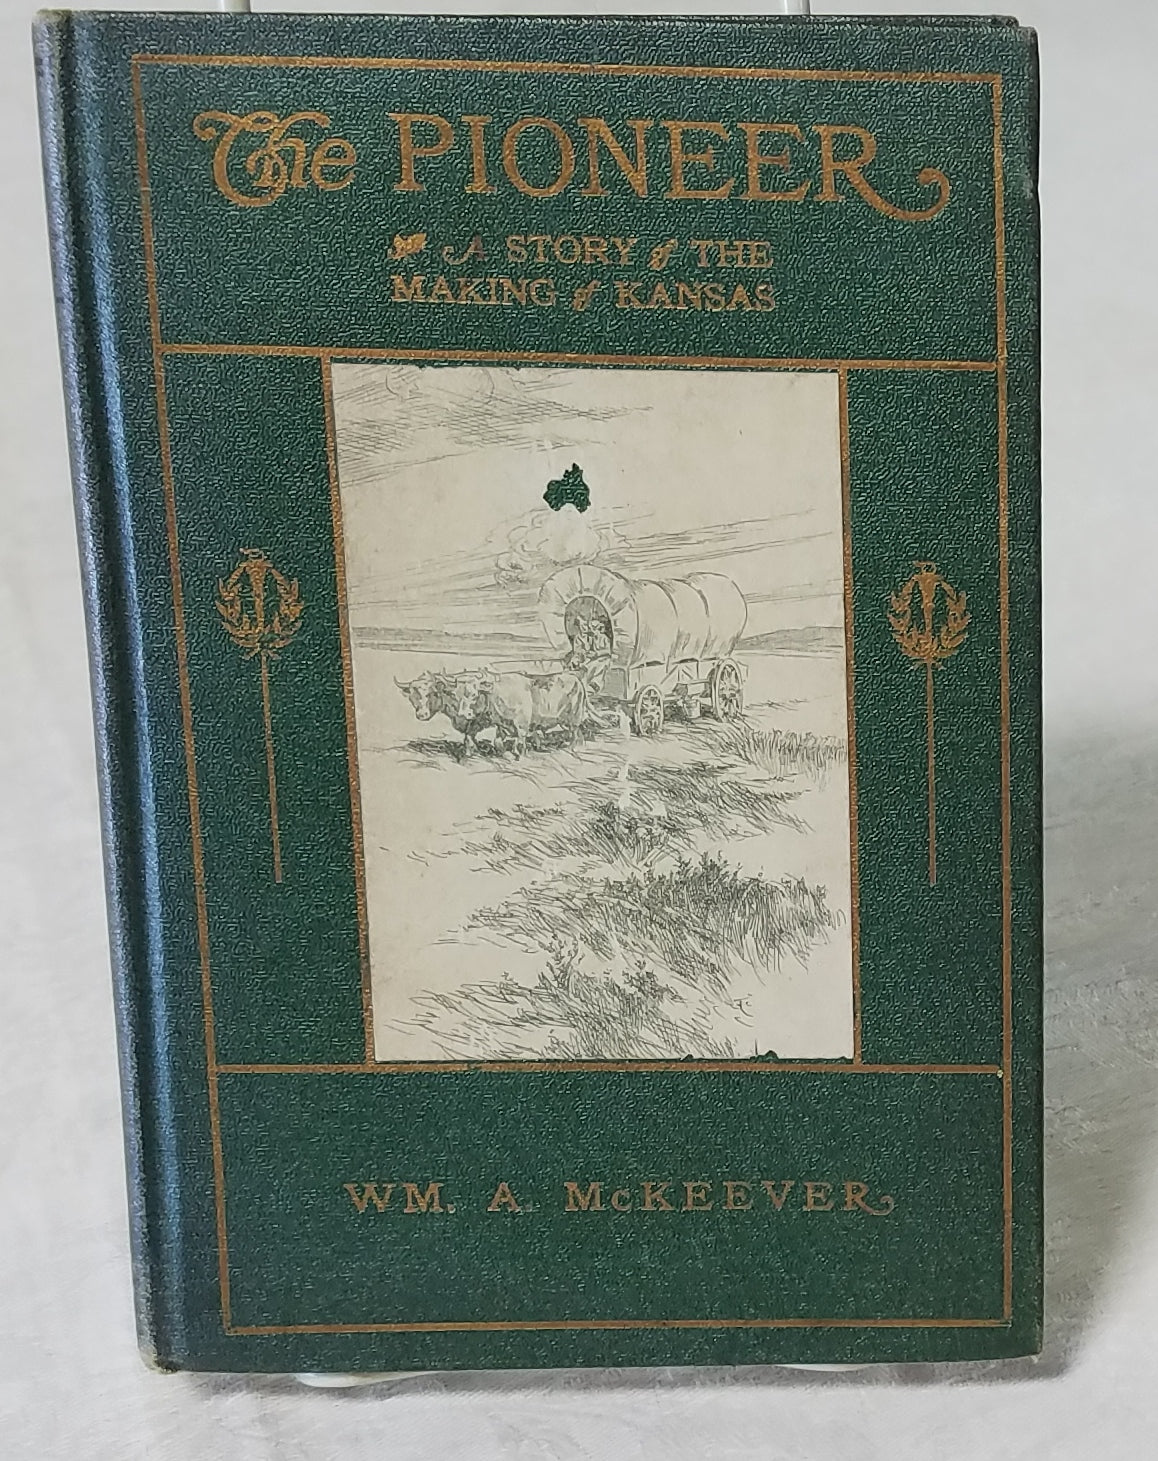 ANTIQUE 1912 PIONEER BOOK-A STORY OF THE MAKING OF KANSAS-SIGNED BY AUTHOR WM MCKEEVER!